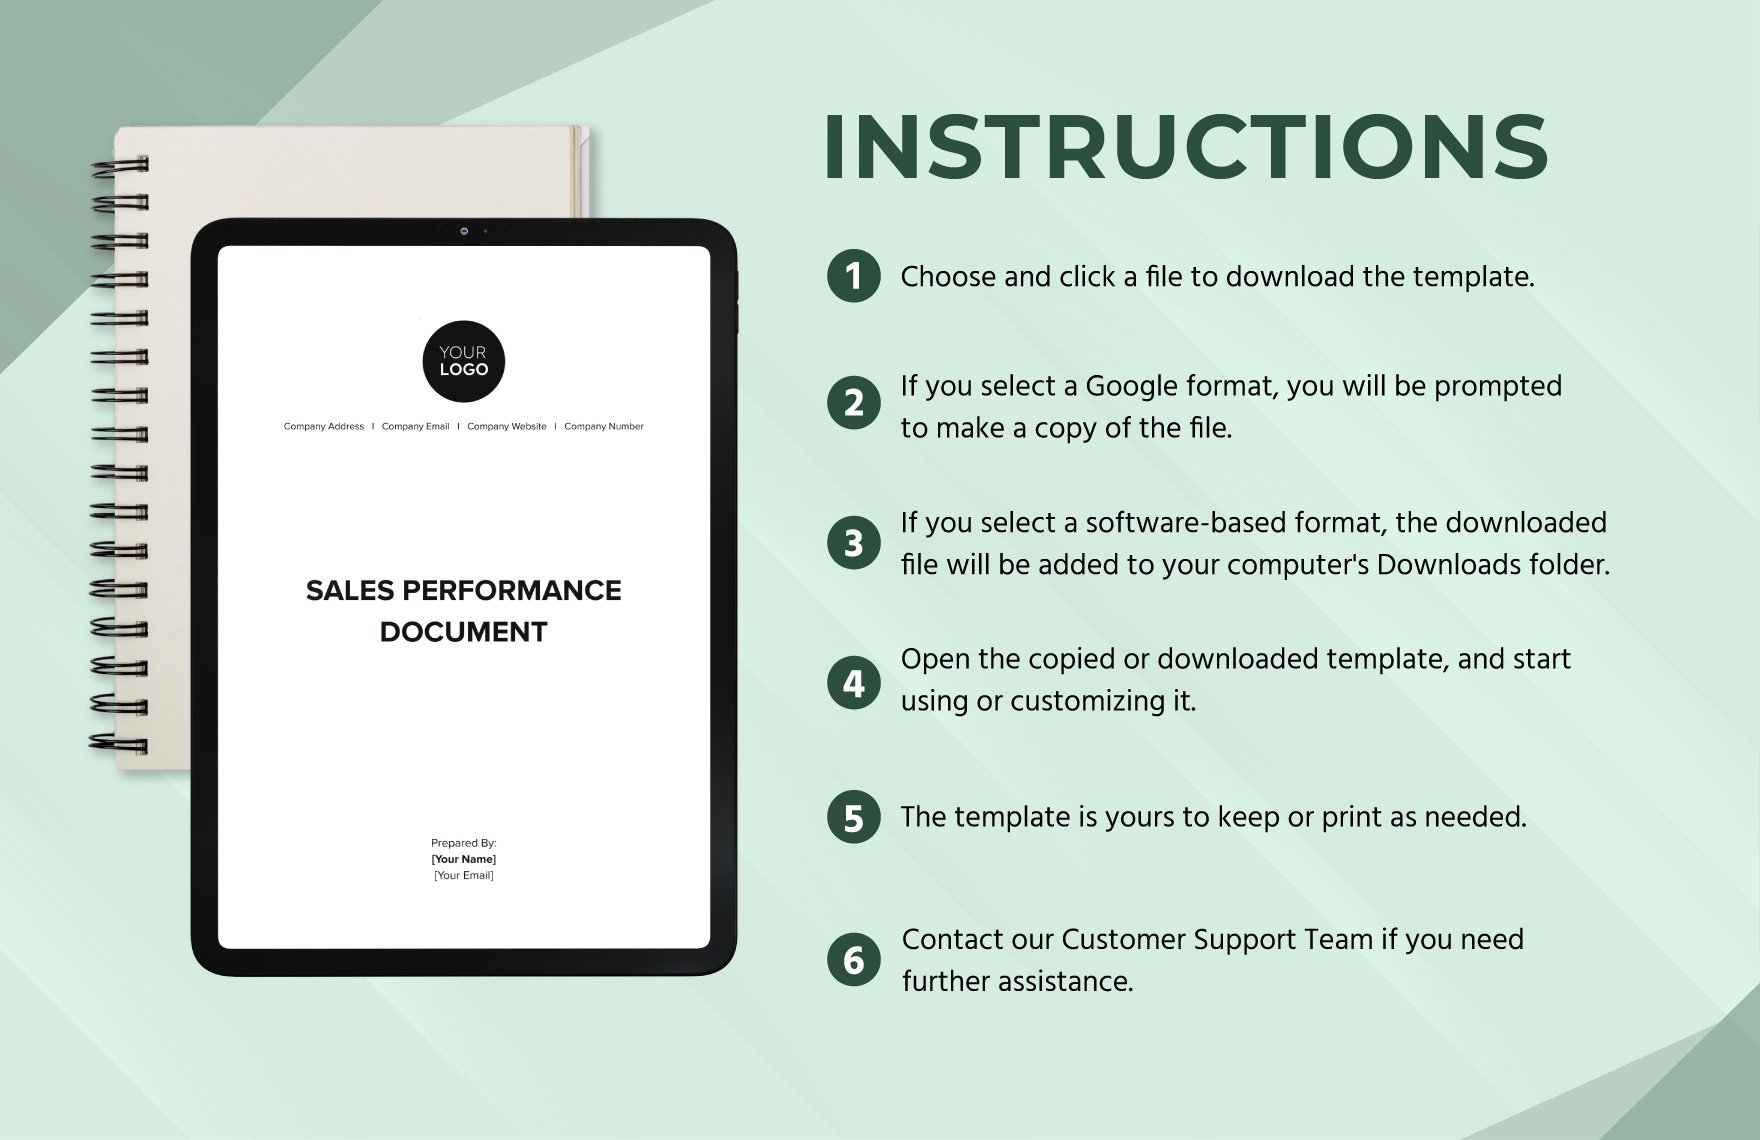 Sales Performance Document Template